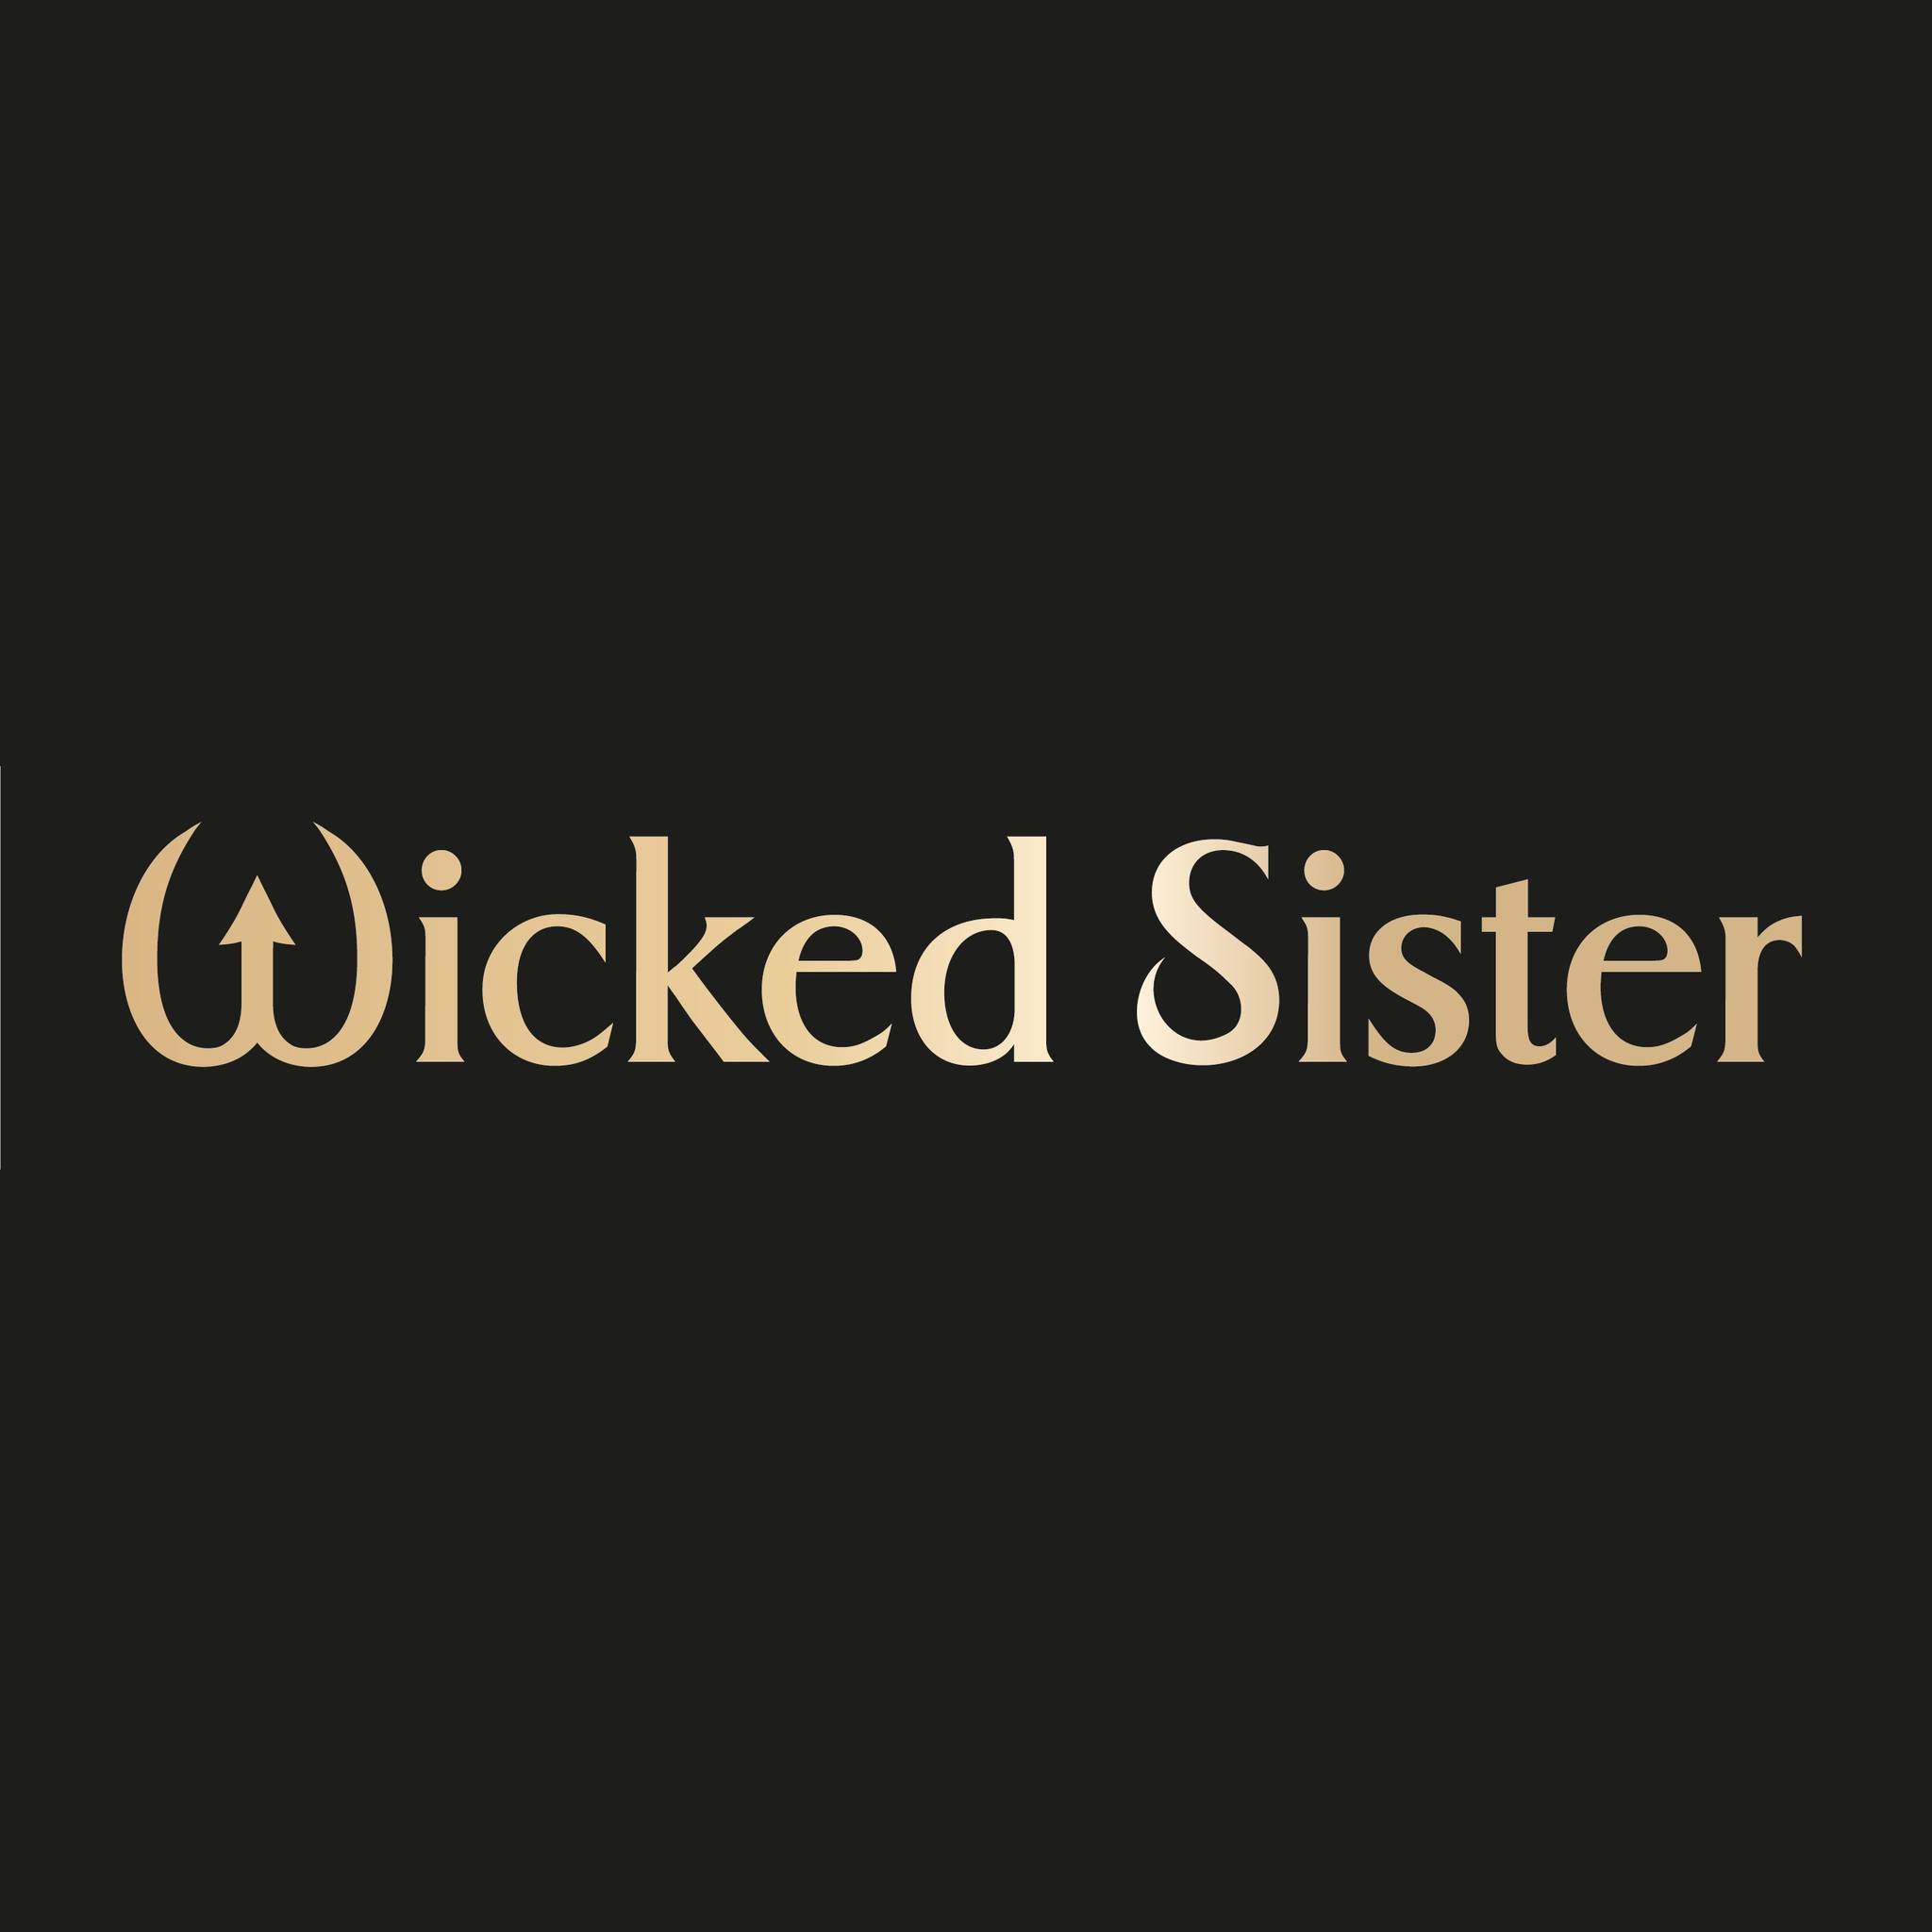 WICKED SISTER